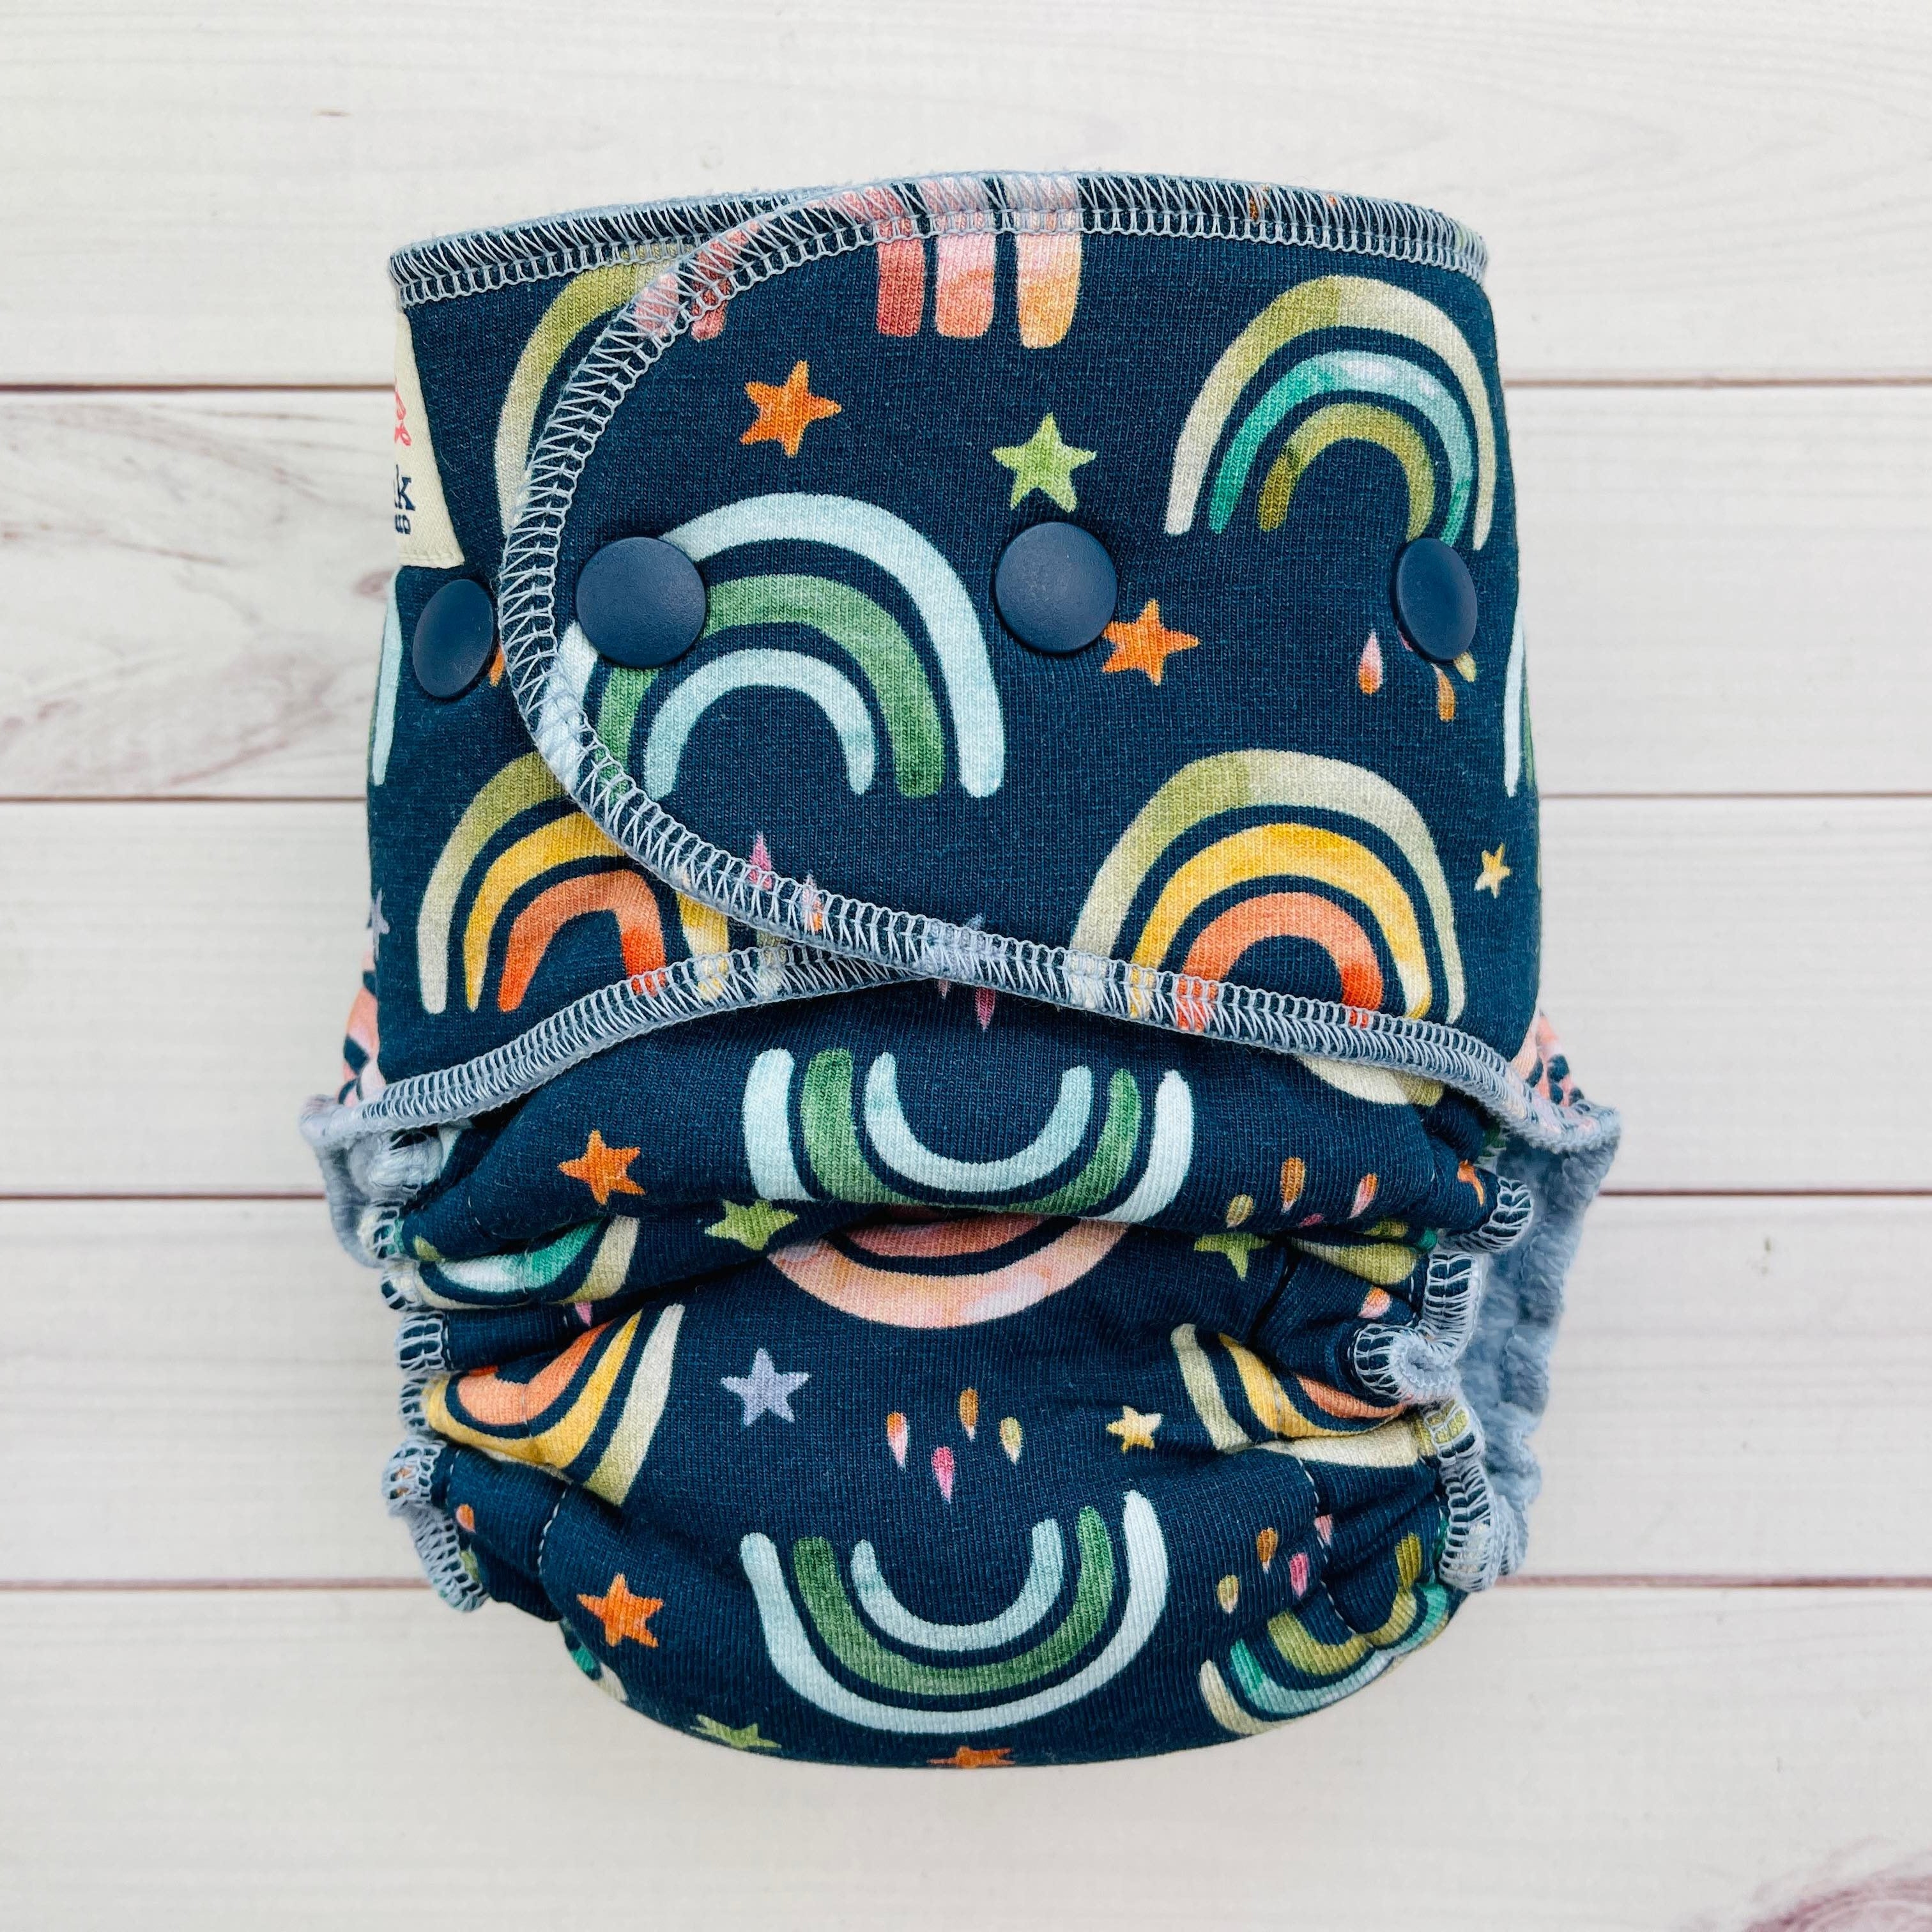 Lilly & Frank Fitted Cloth Diaper Stars & Rainbows Petite Hybrid Cloth Diaper - Hybrid - Classic Serged